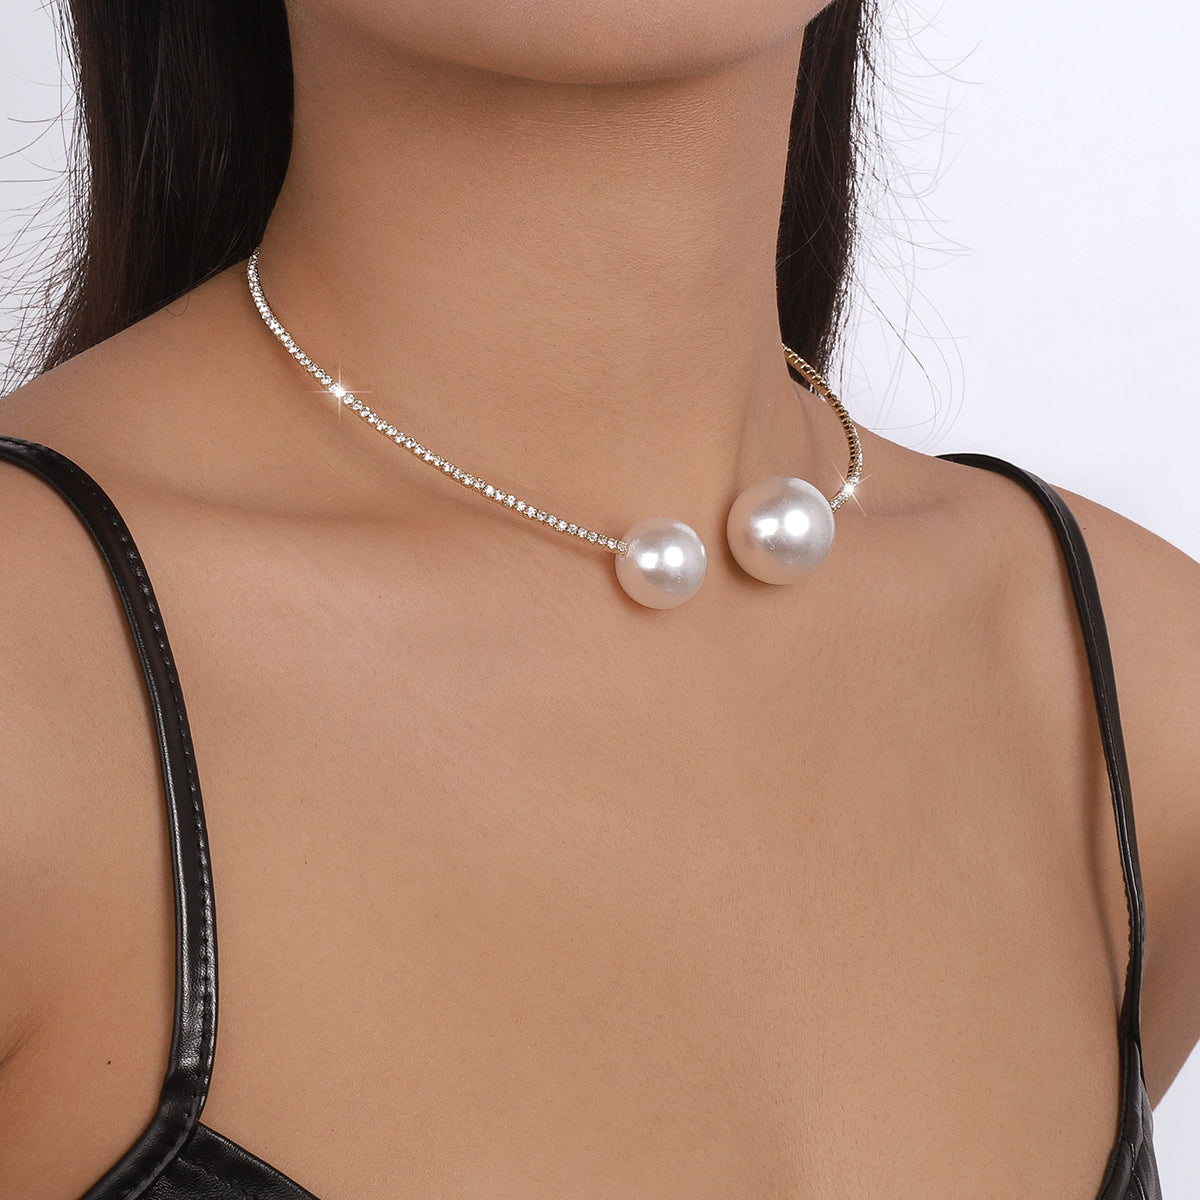 Elegant Big Pearls Open Claw Chain Collar Necklace medyjewelry